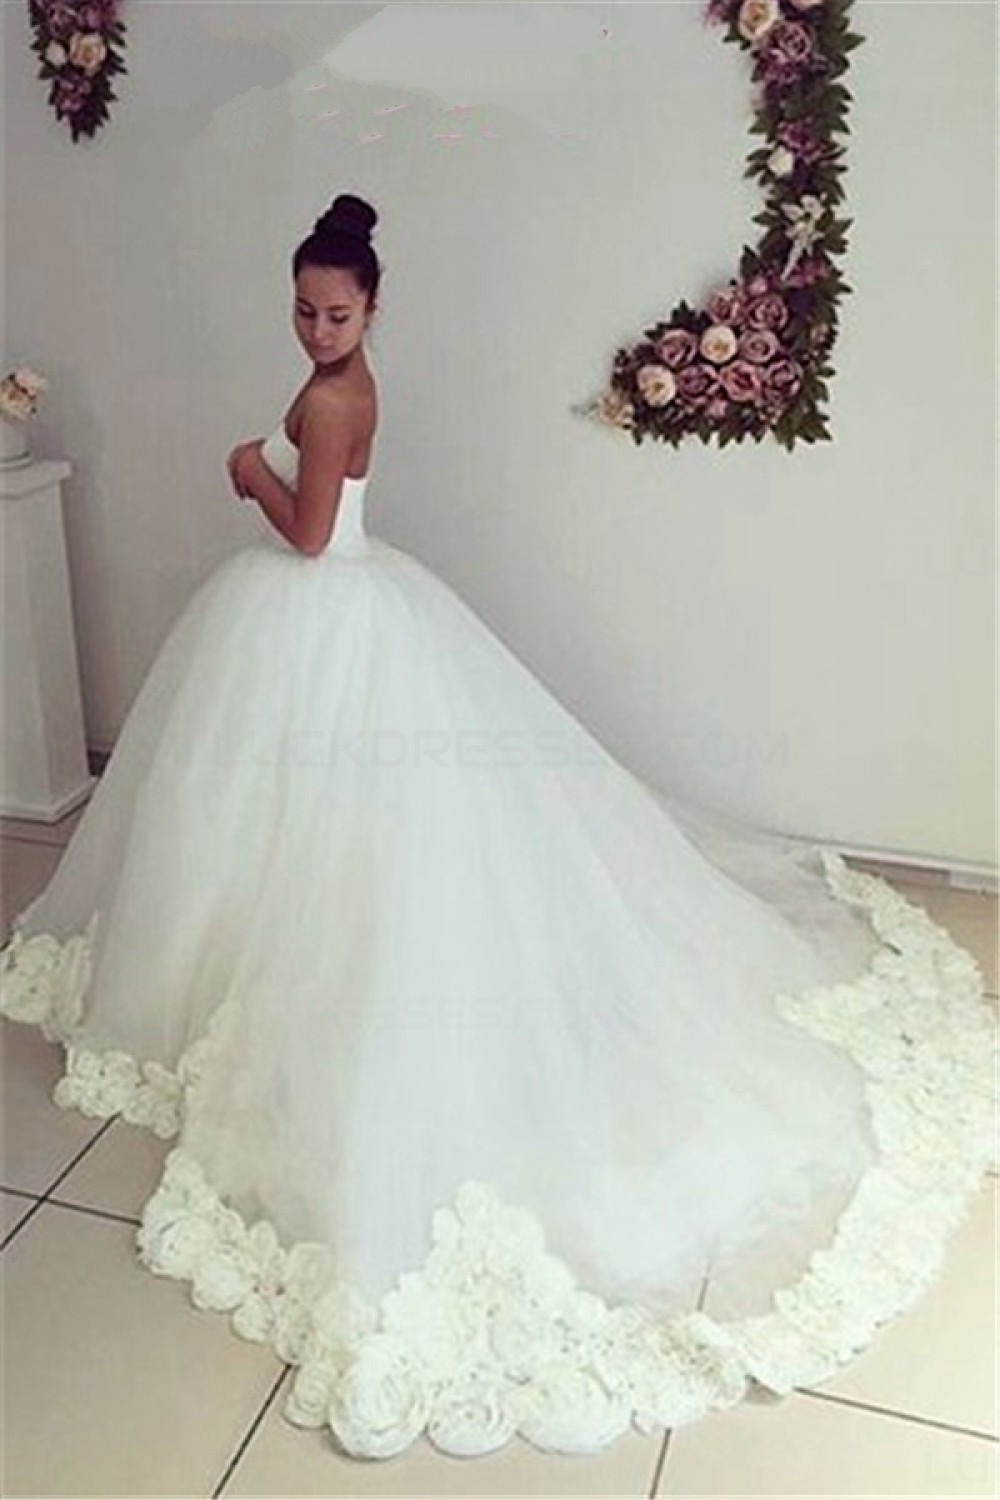 Sweetheart Wedding Gown
 Ball Gown Sweetheart Wedding Dresses Bridal Gowns